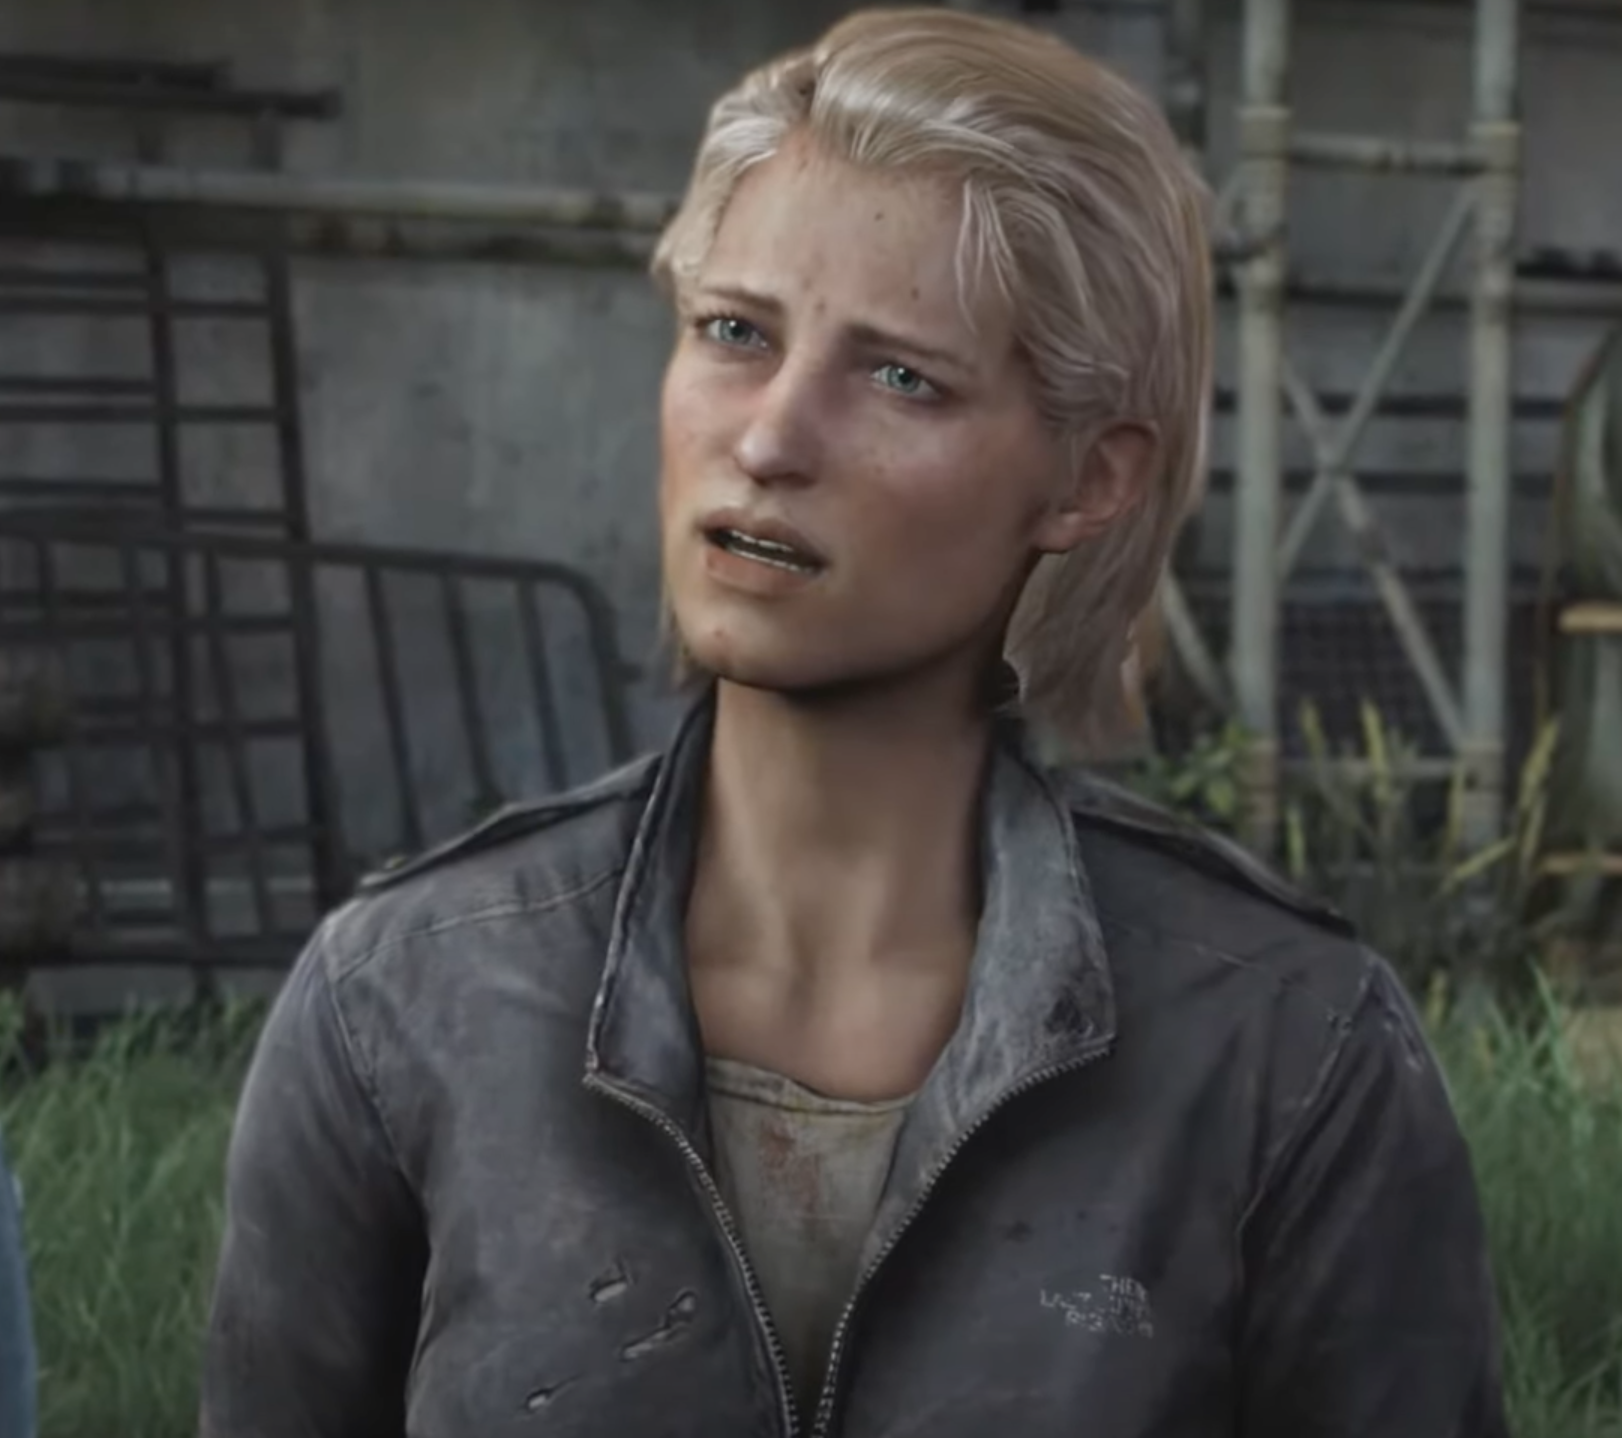 Maria video game character in The Last of Us